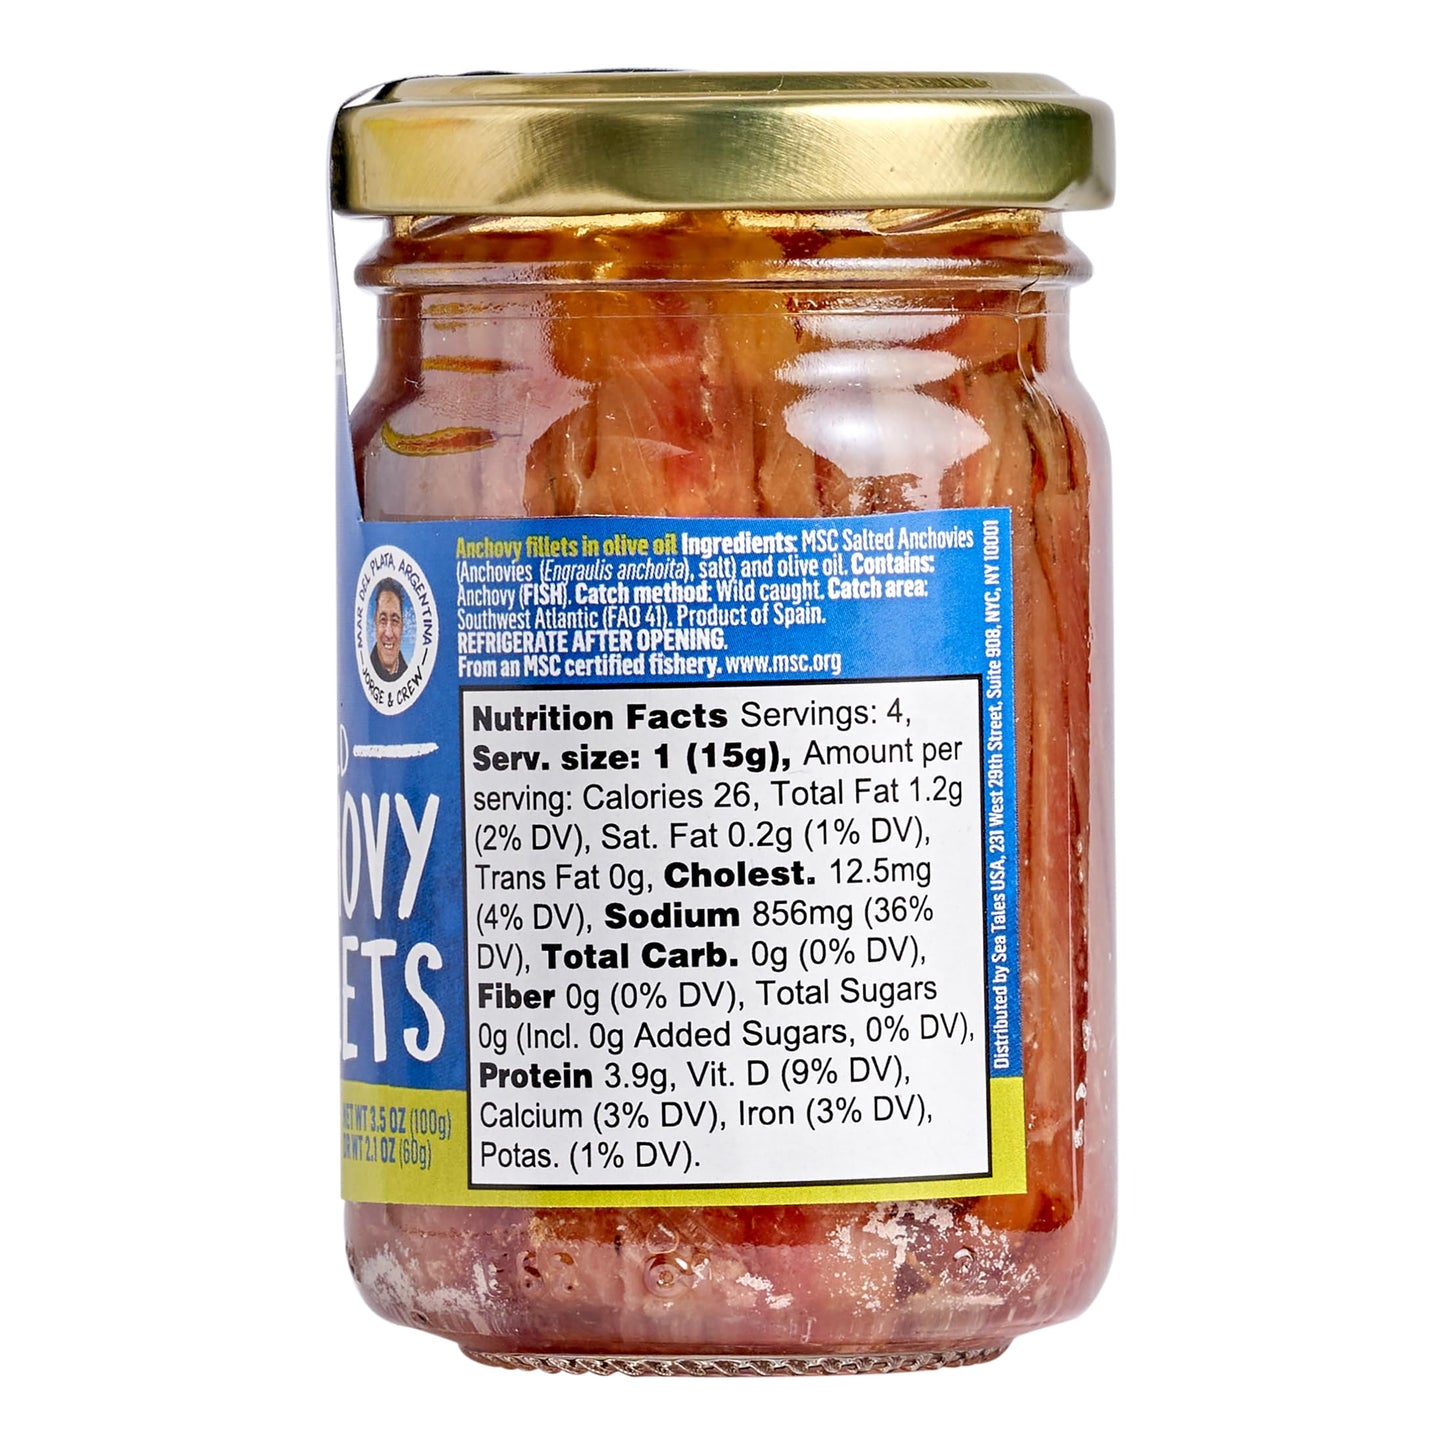 Sea Tales Anchovy Fillets in Olive Oil - Jar - Wild Caught Fish - High in Omega 3 Fatty Acids - Gluten Free - High Protein Food - Sustainably Caught - Keto Diet Friendly - 3.5 oz - (12 Pack)